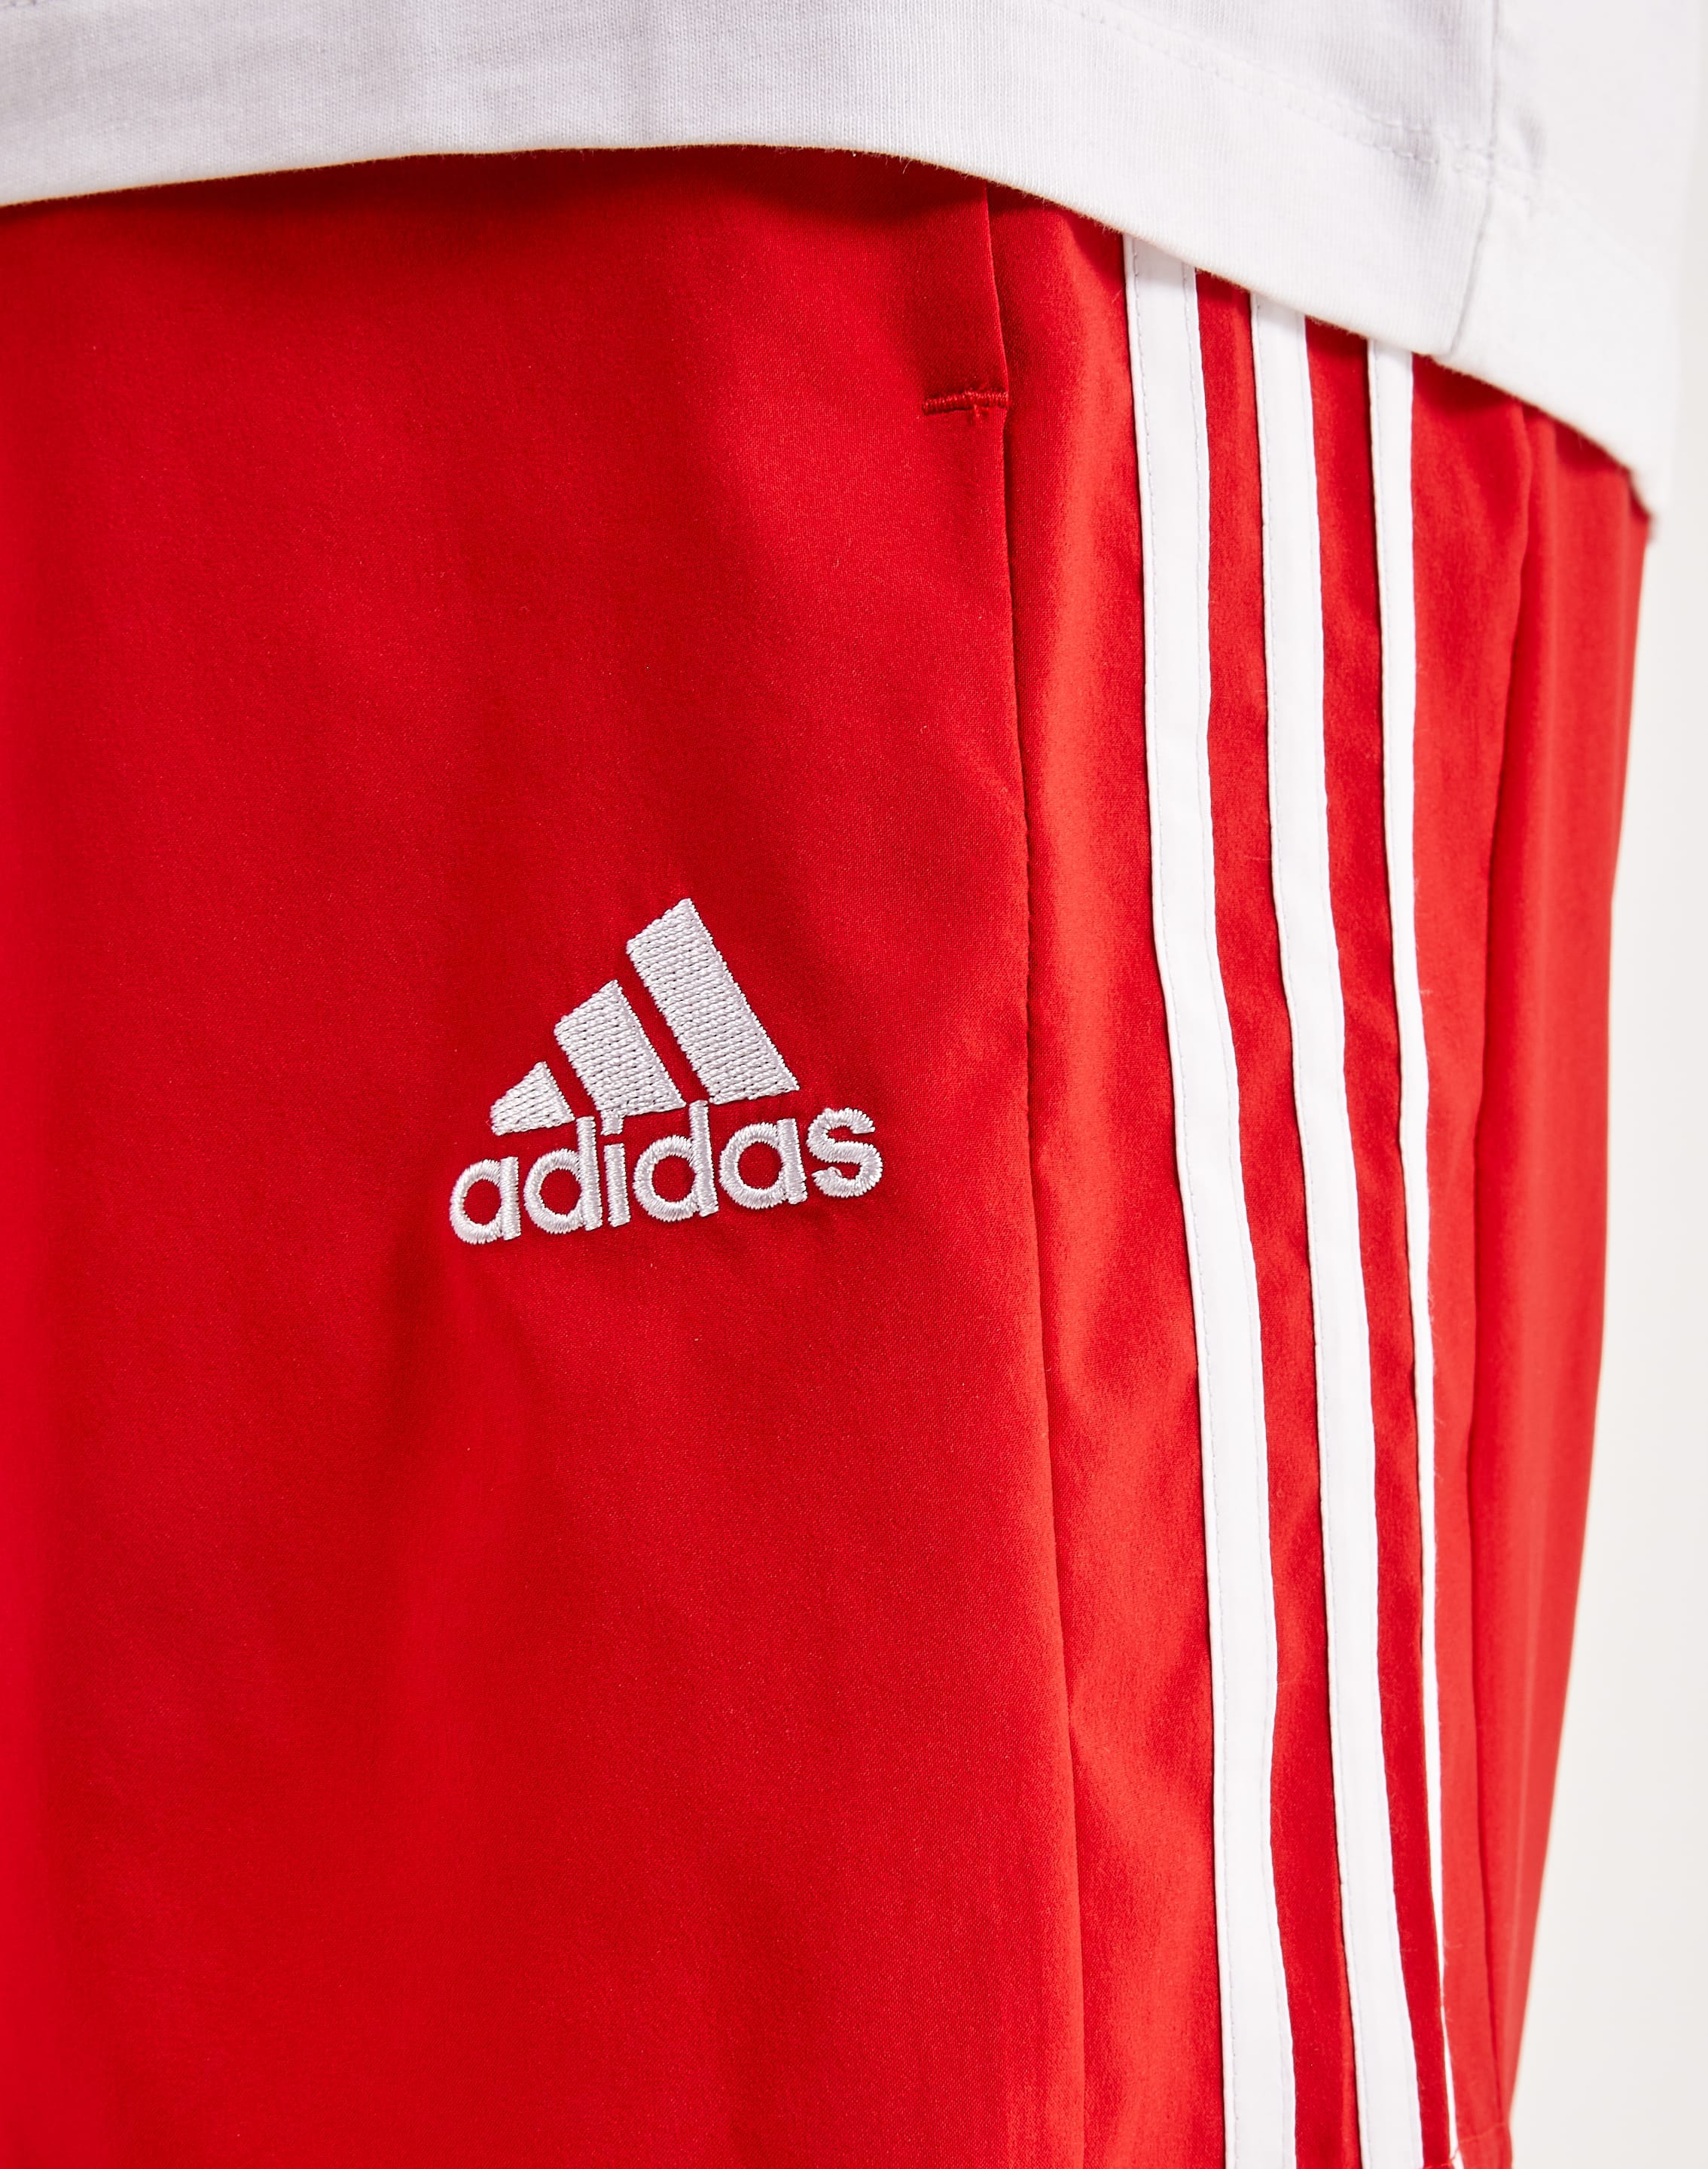 – Adidas Shorts DTLR Chelsea 3-Stripes